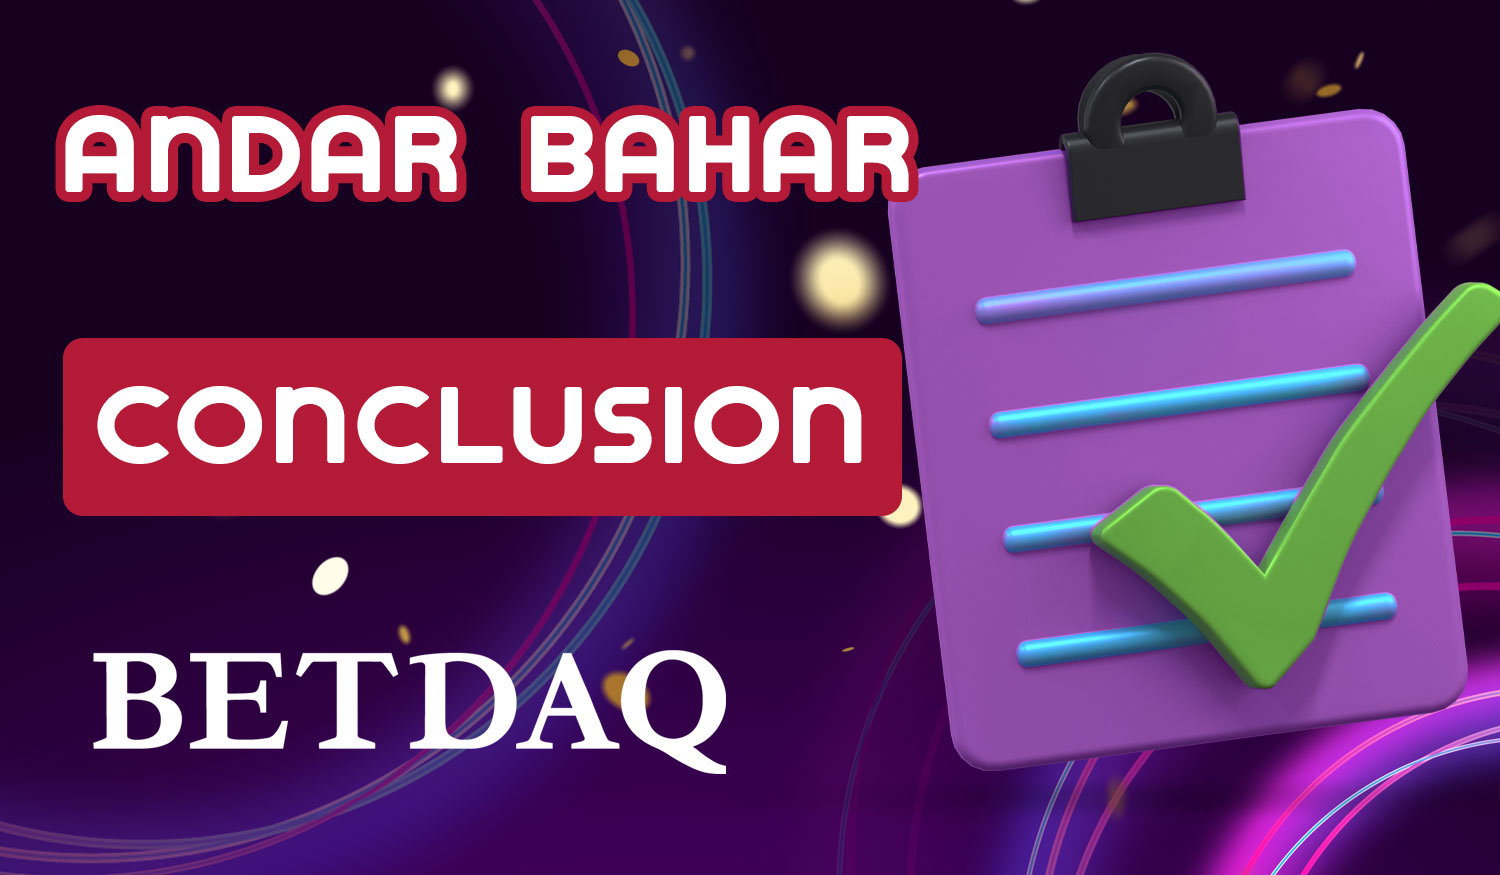 Betdaq is a platform where you can comfortably play the traditional Indian game of Andar Bahar